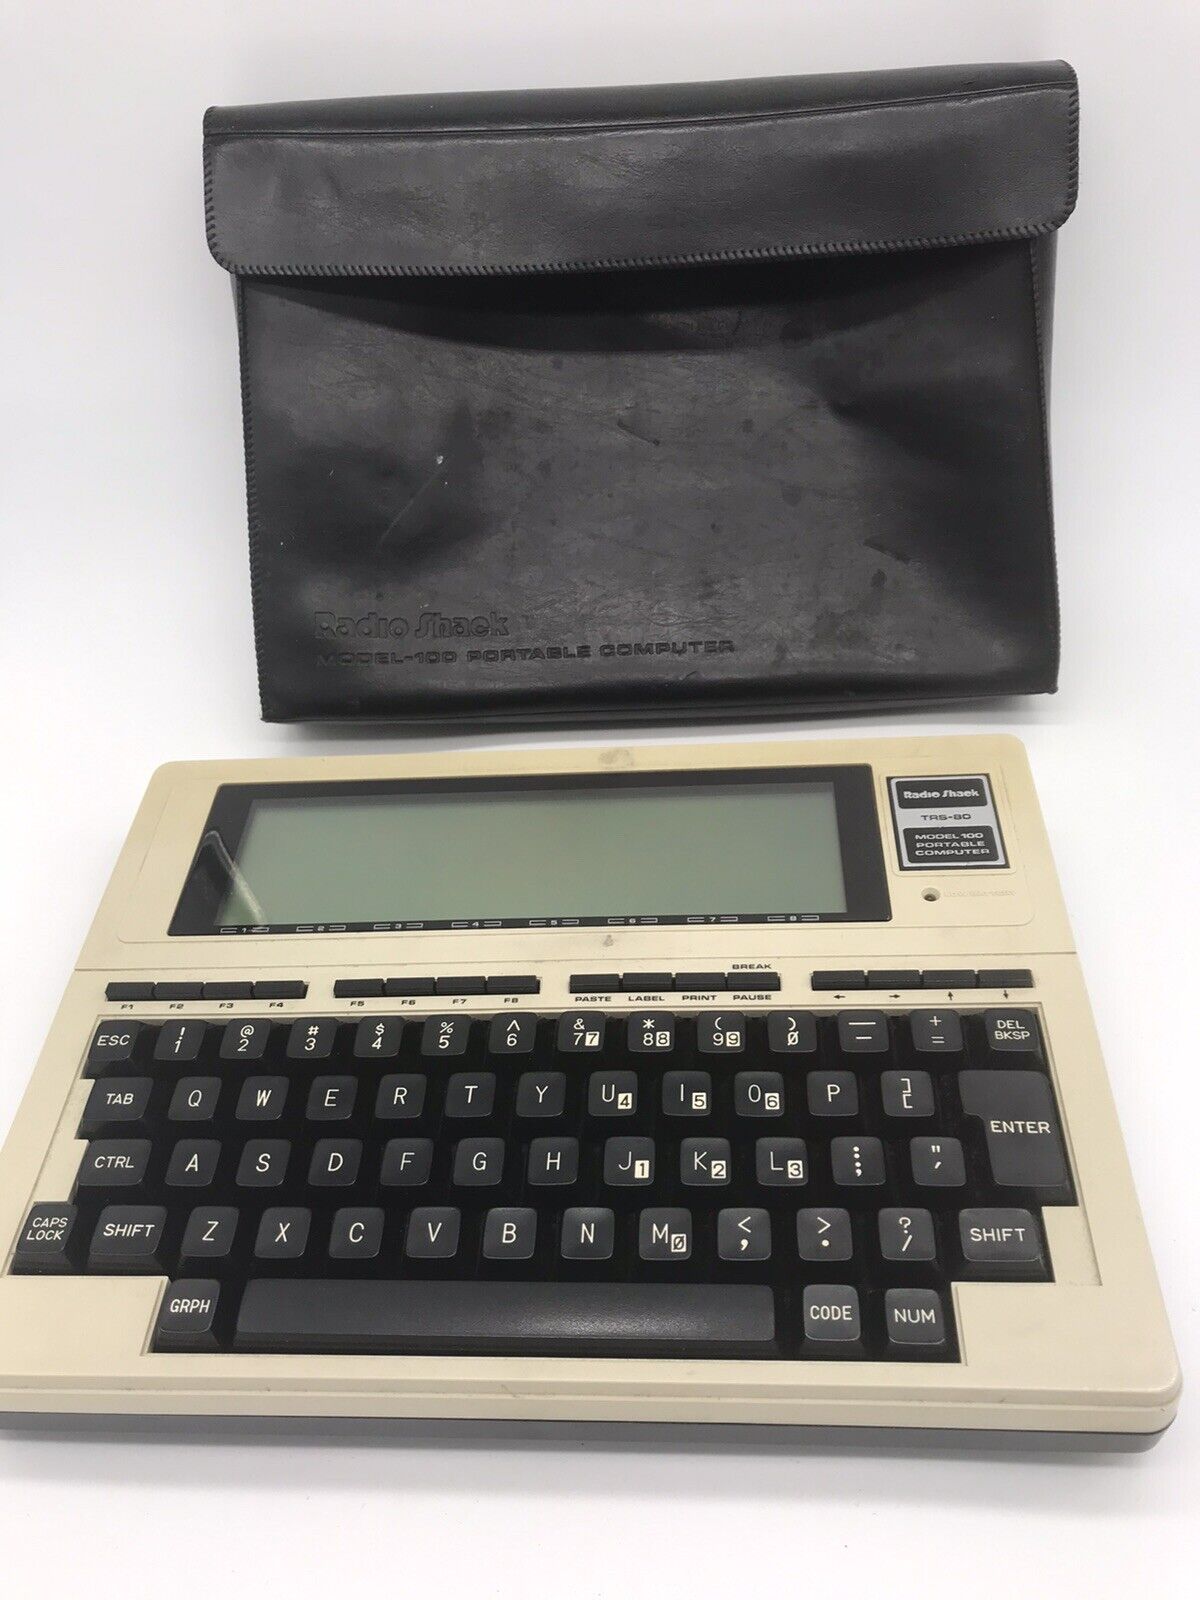 VINTAGE Radio Shack TRS-80 Portable Computer Model 100 UNTESTED  SHIPS FREE NOW